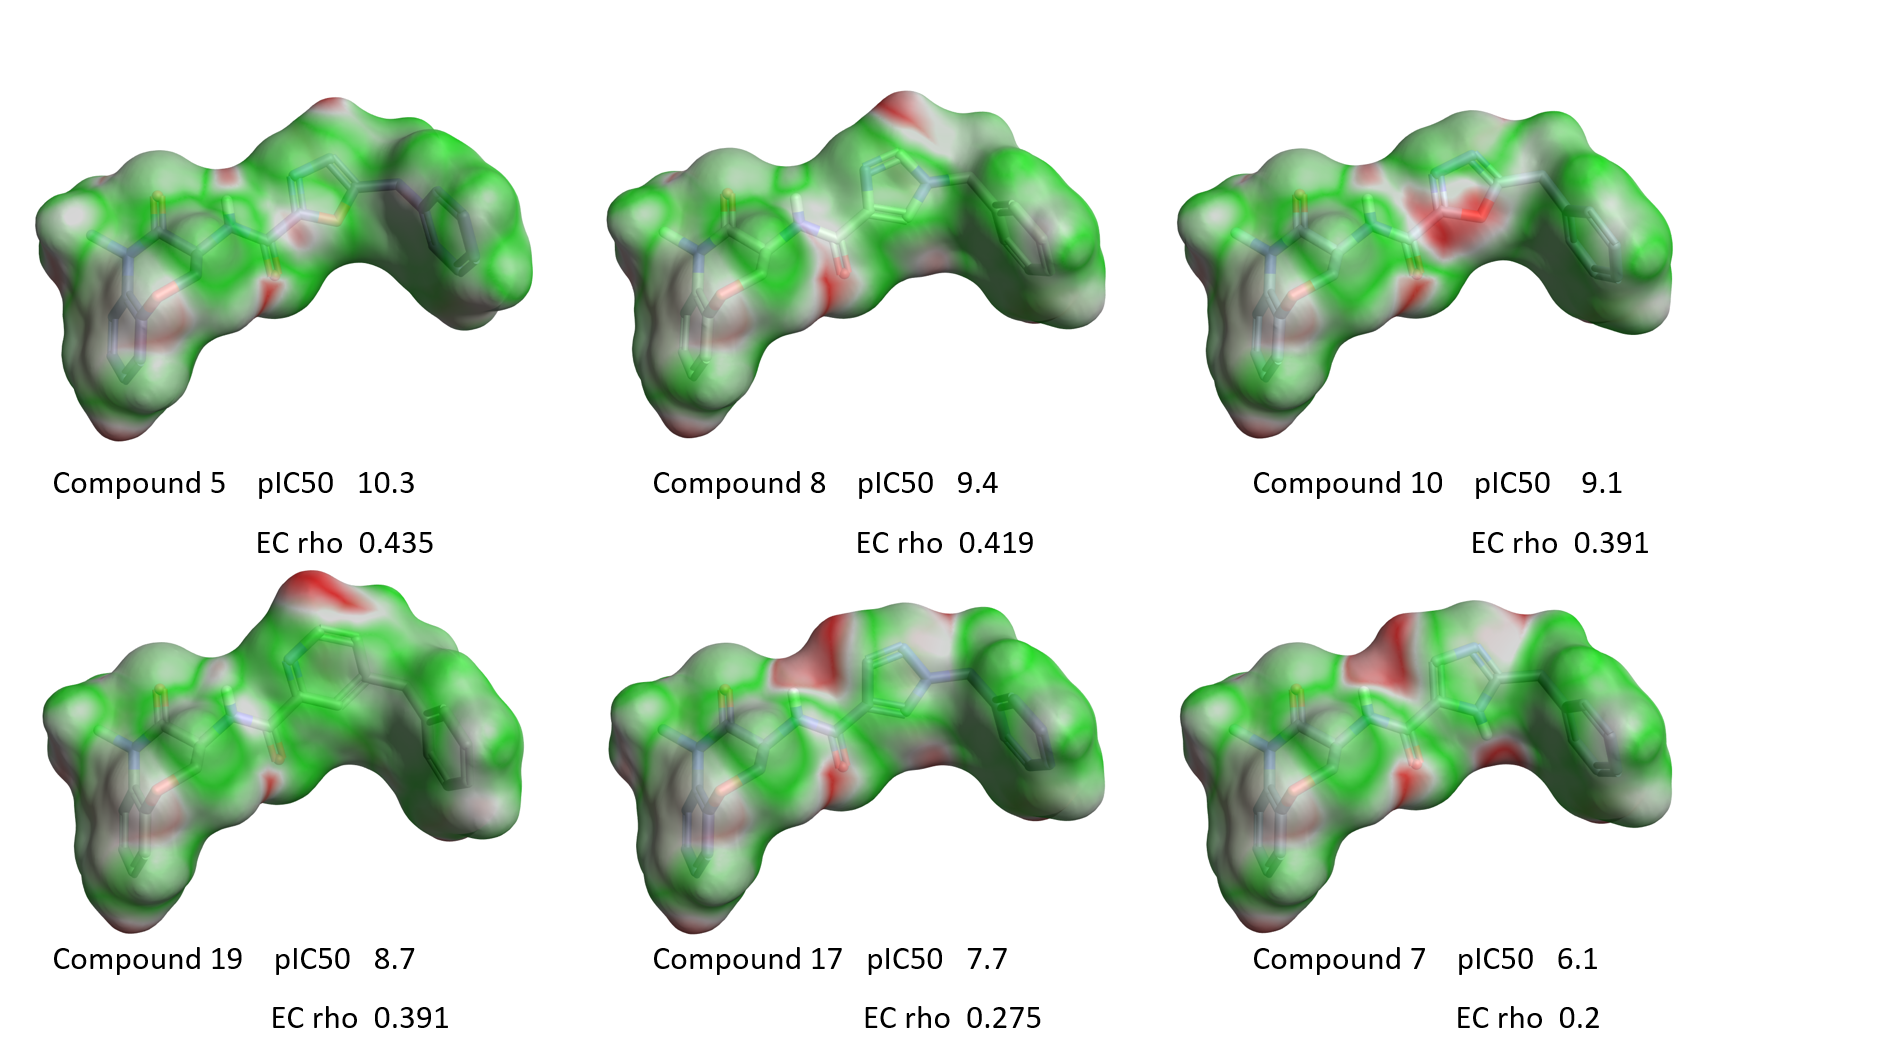 Figure 10_EC maps of a few examples with variation around the isoxazole ring